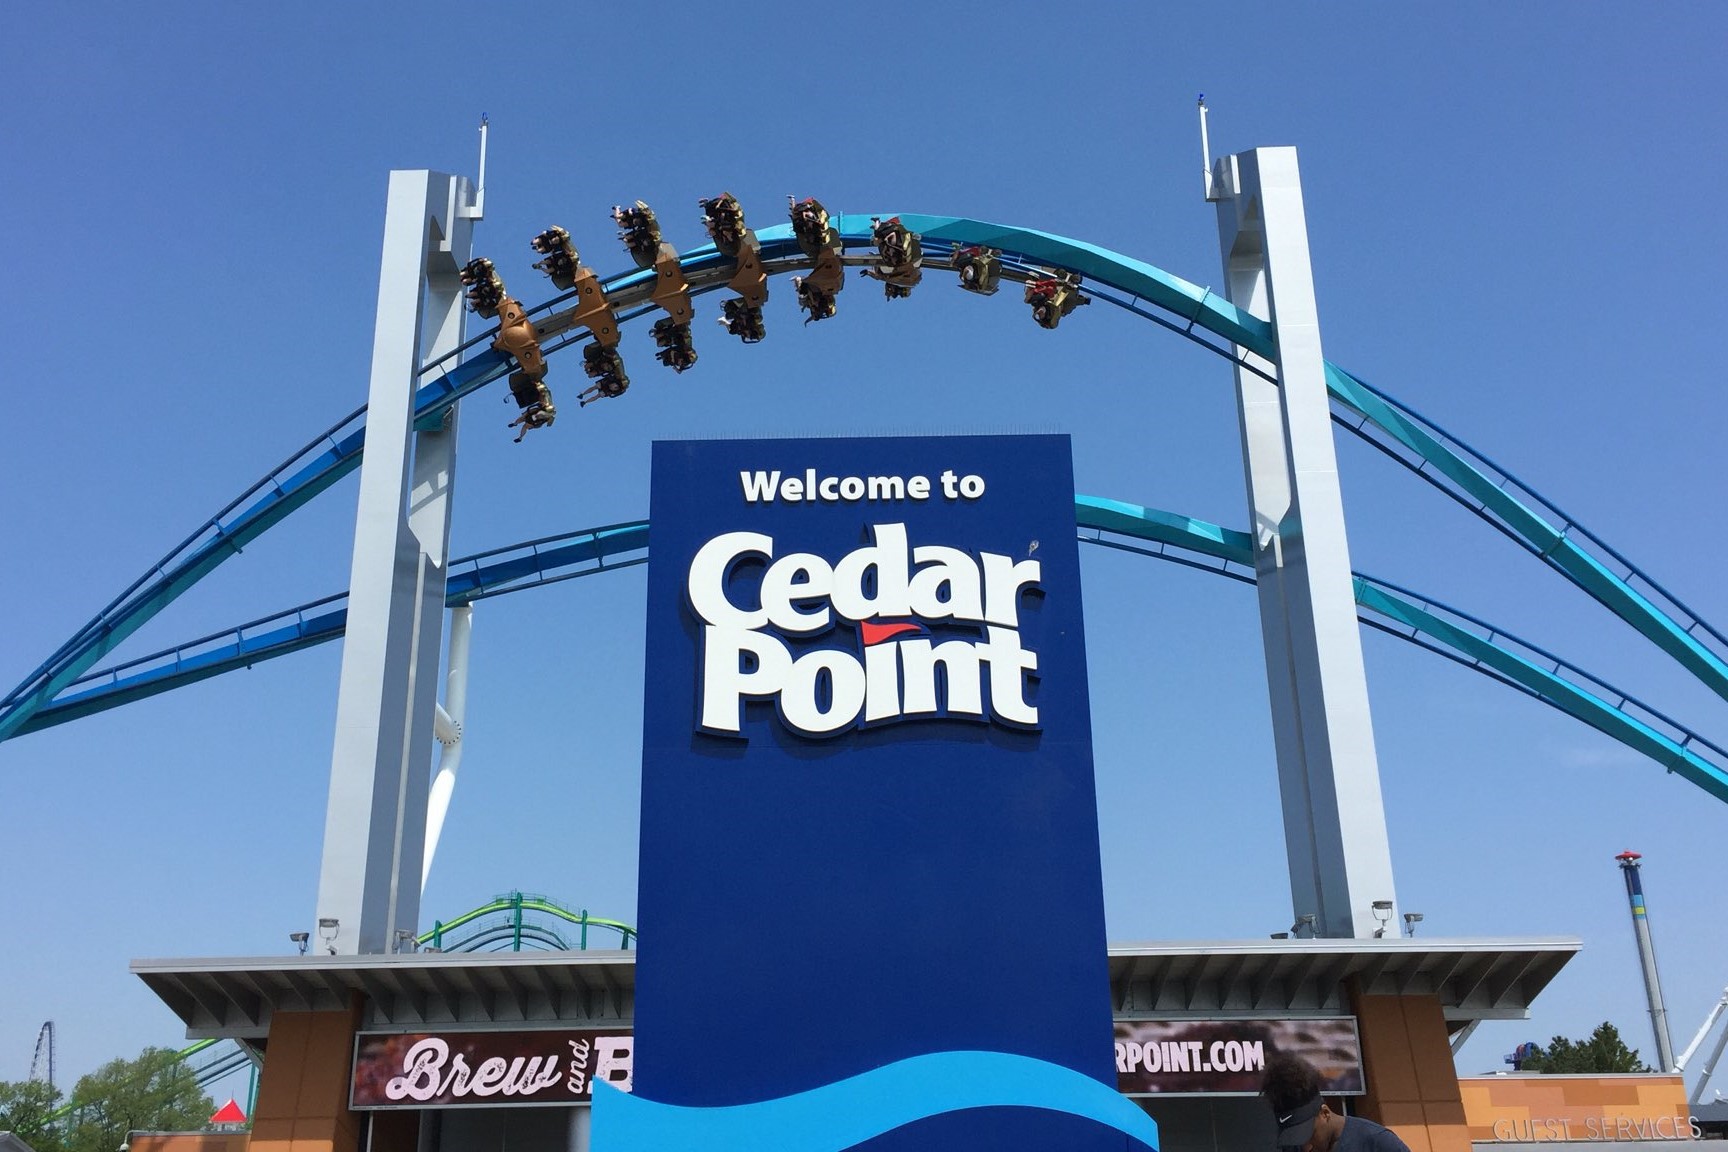 21 of the Best Theme Parks in the US - Stuck on the Go